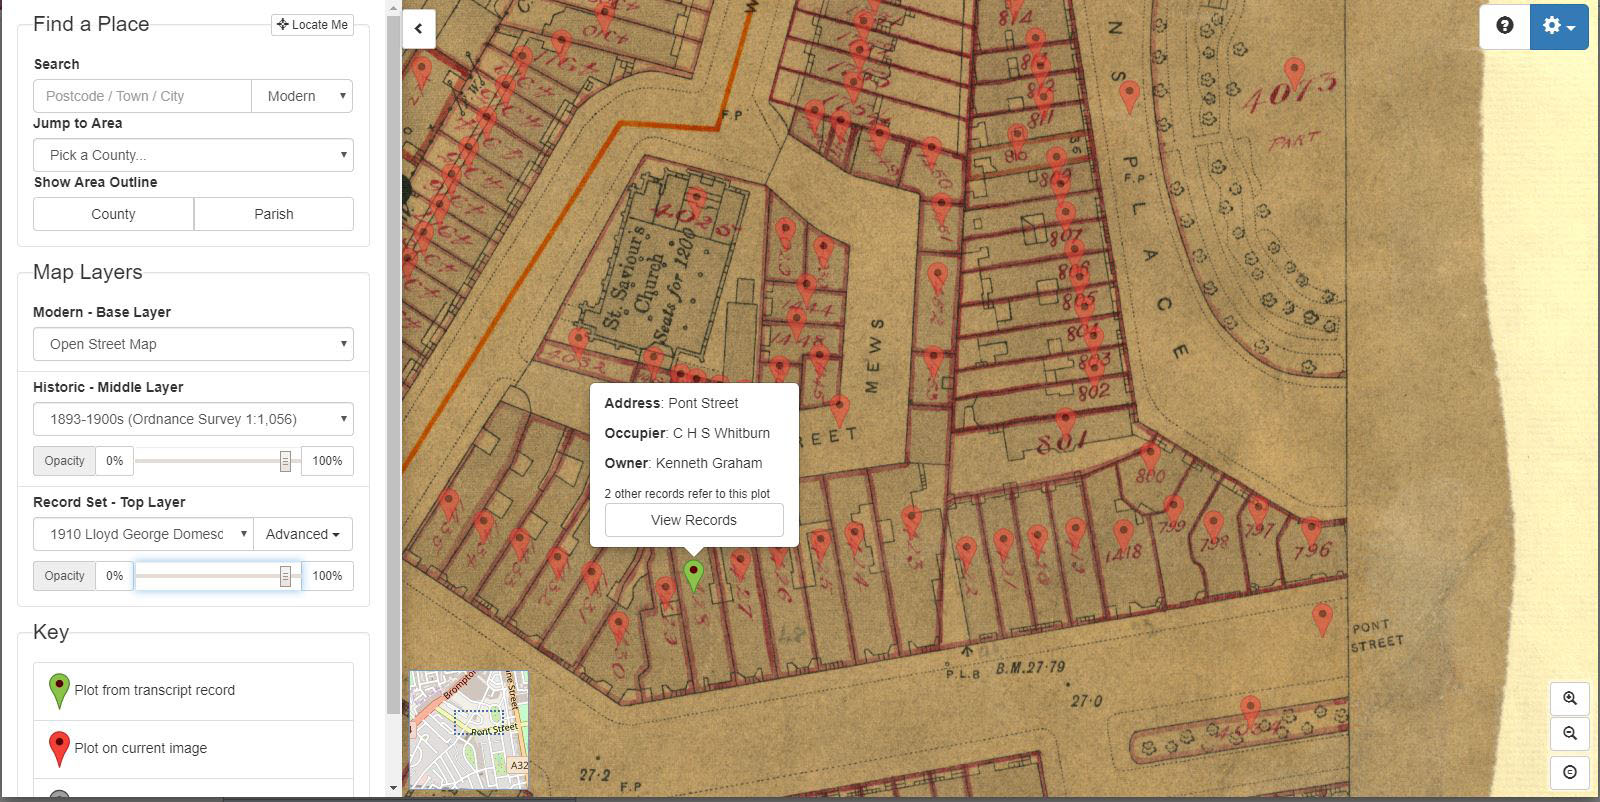 The Lloyd George Domesday Survey 1910-1915 shows a Kensington property that Grahame part owned. Large-scale Ordnance Survey maps reveal the location